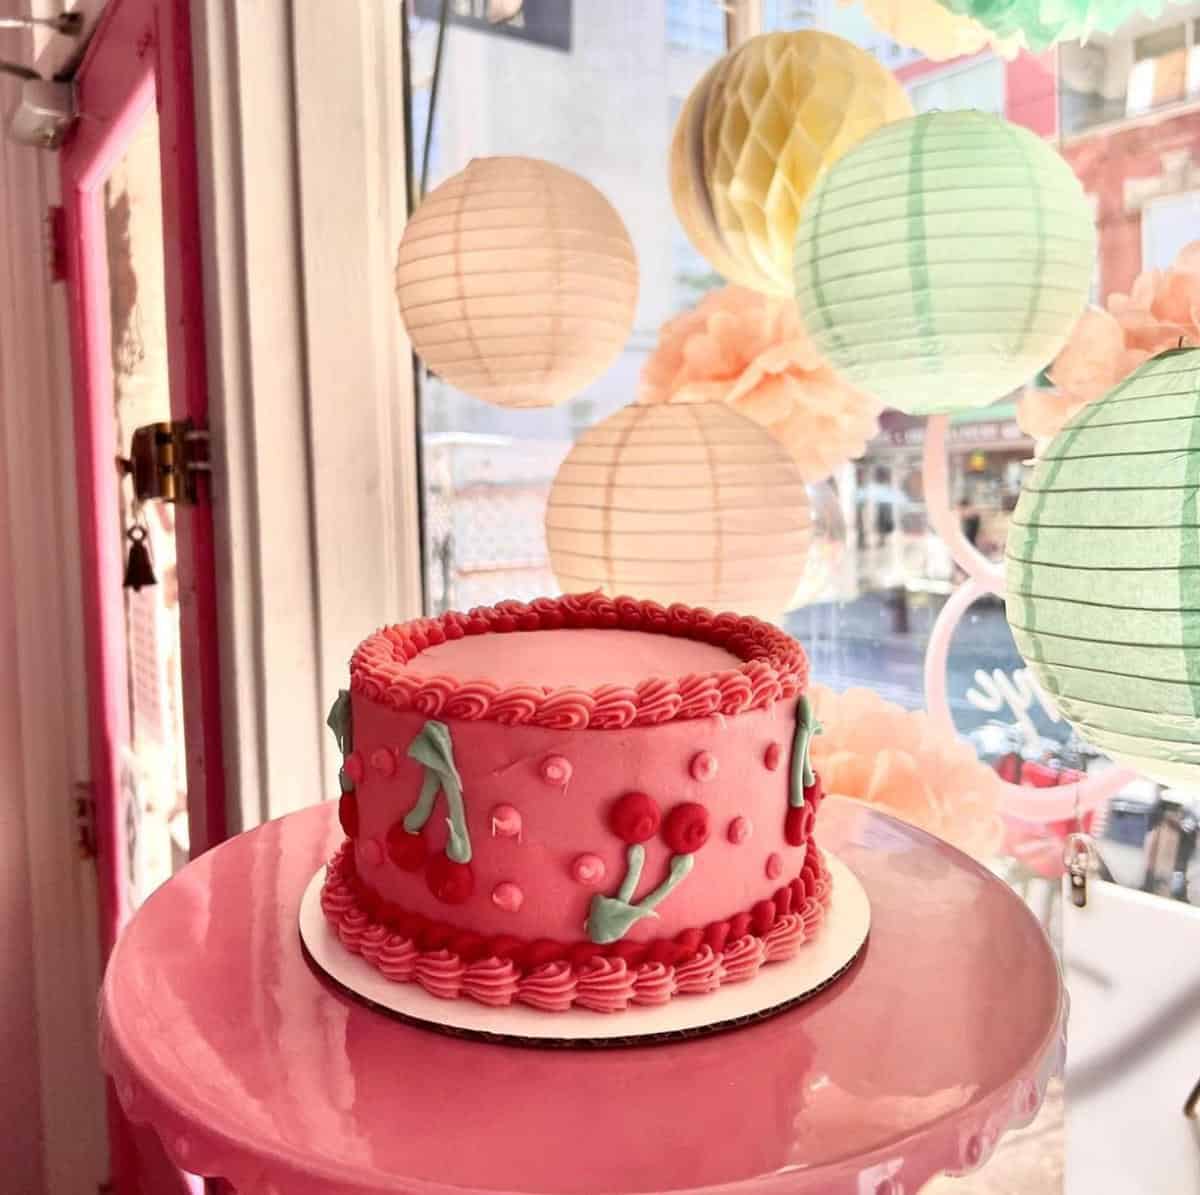 Round vegan cake decorated with cherry theme sitting on a table with lanterns behind it.